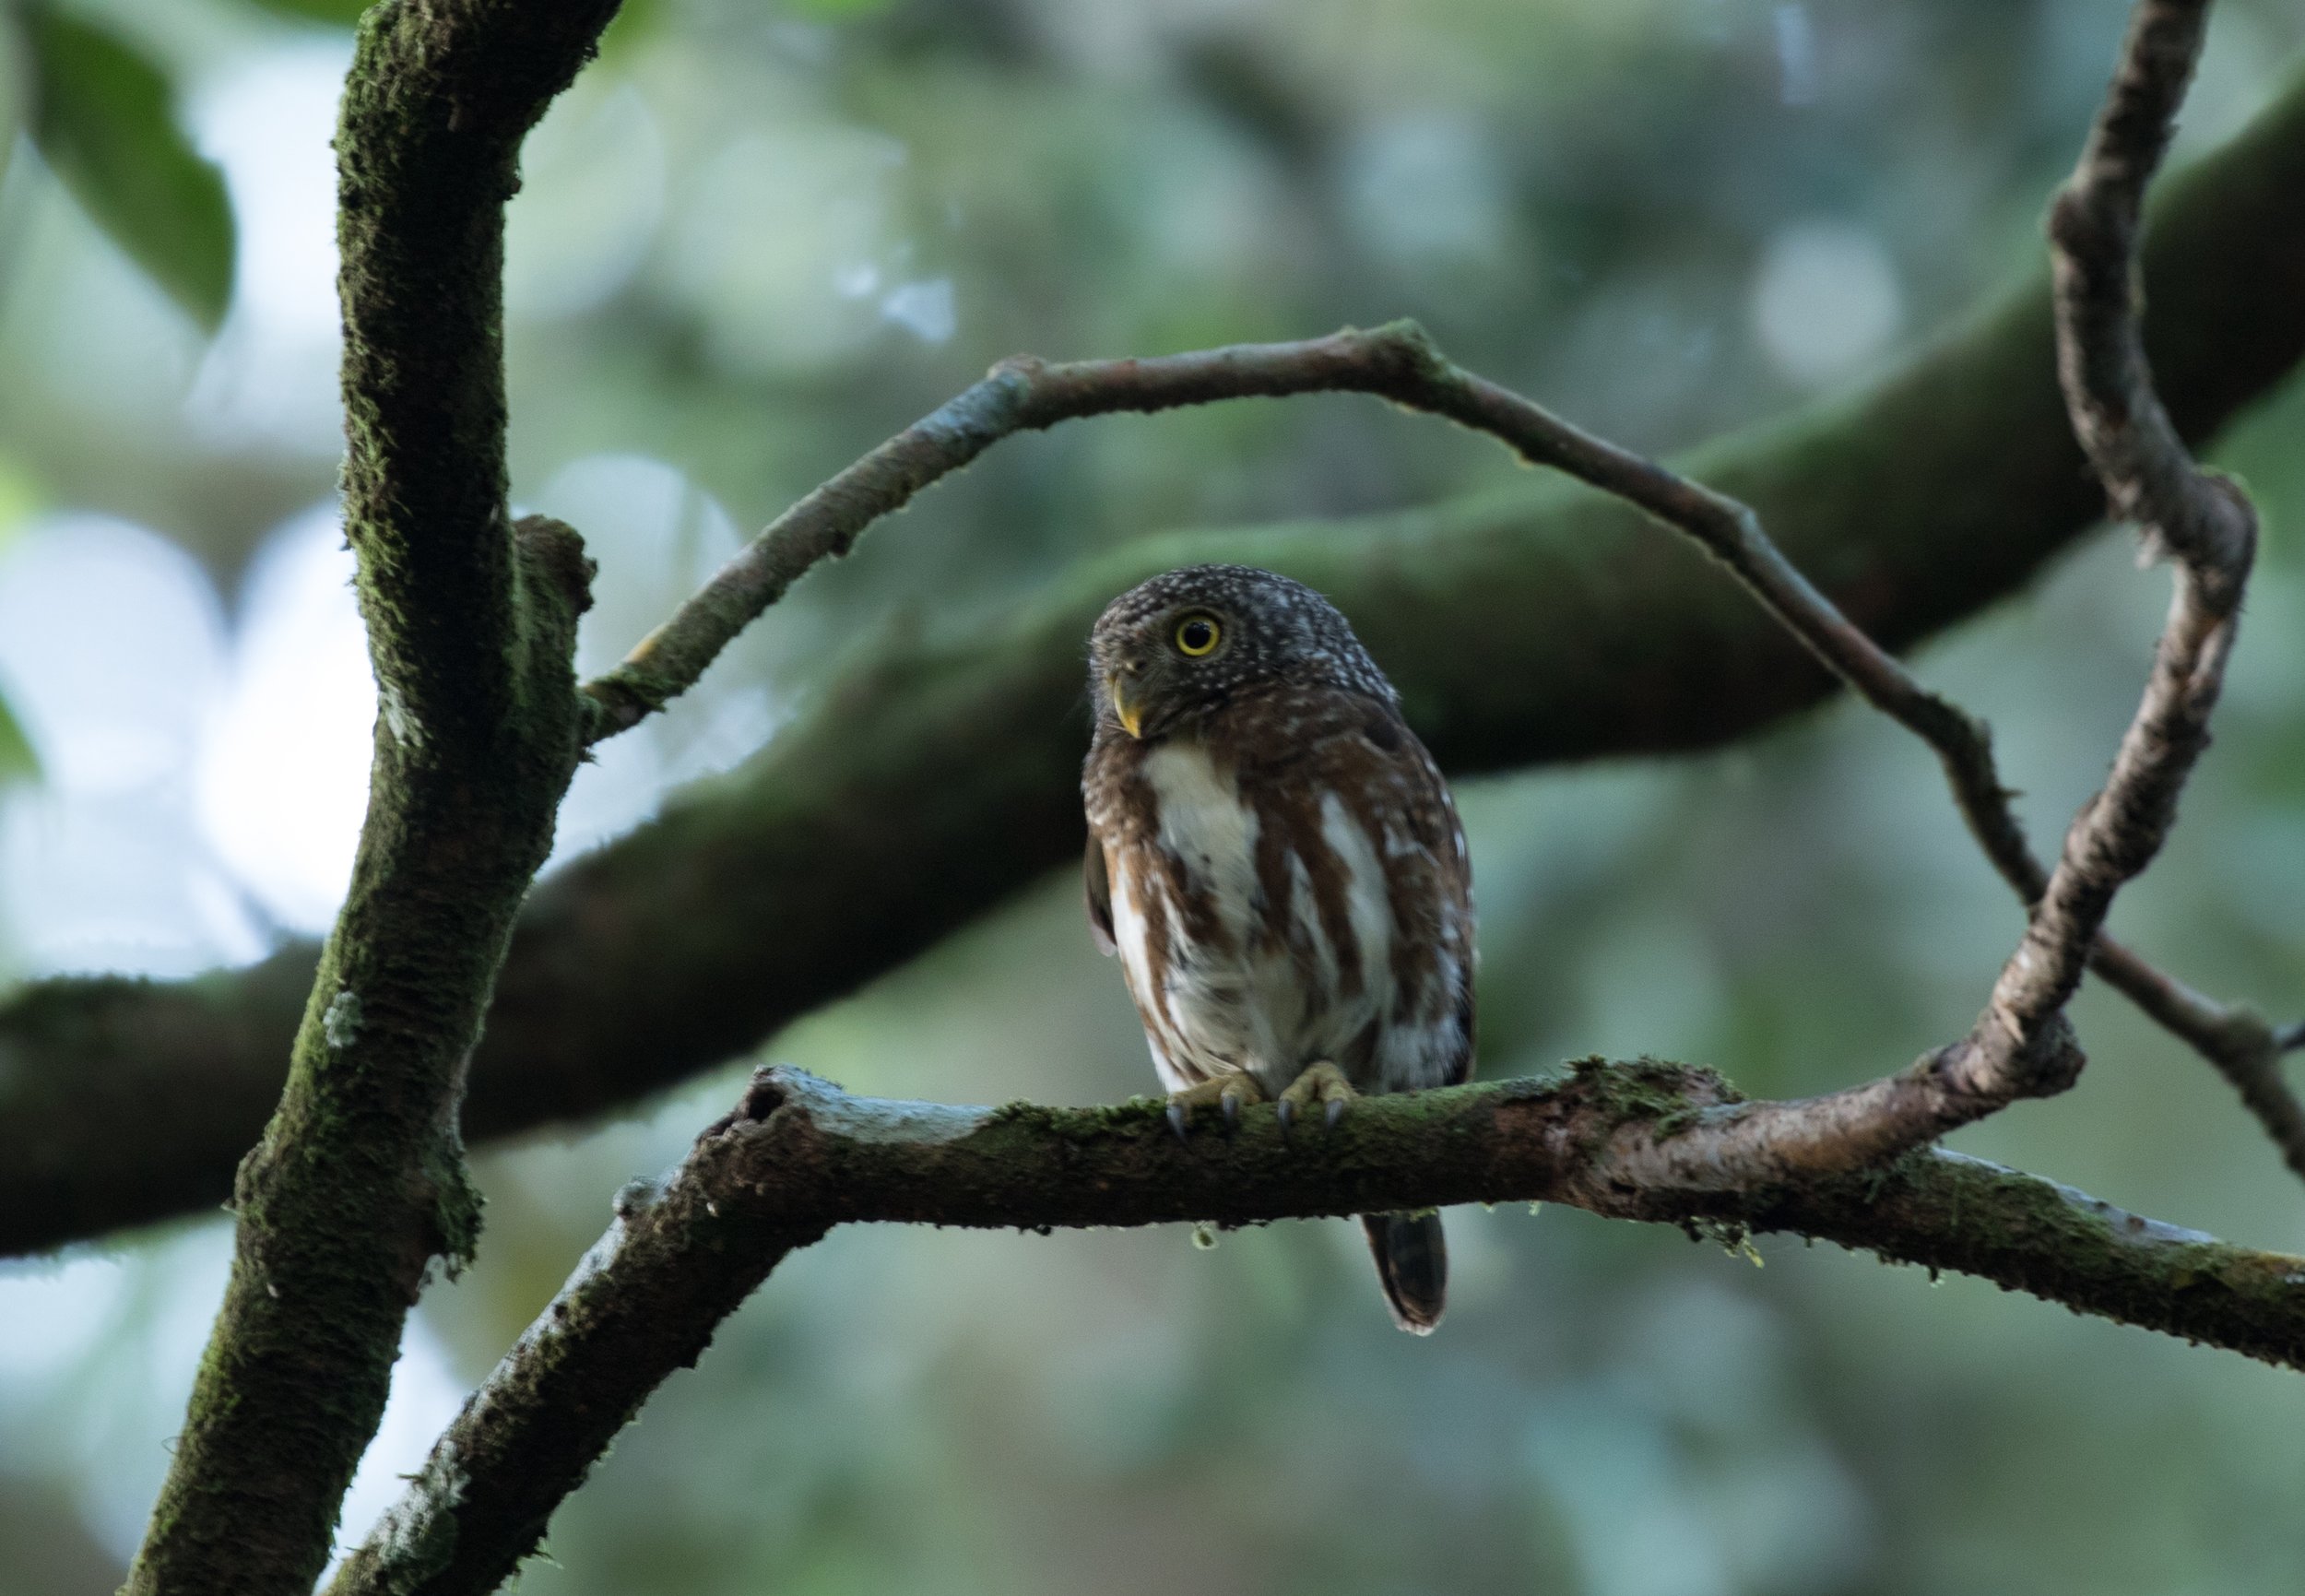  A Collared Owlet and I were both roaming the forest at 6:30 a.m. 